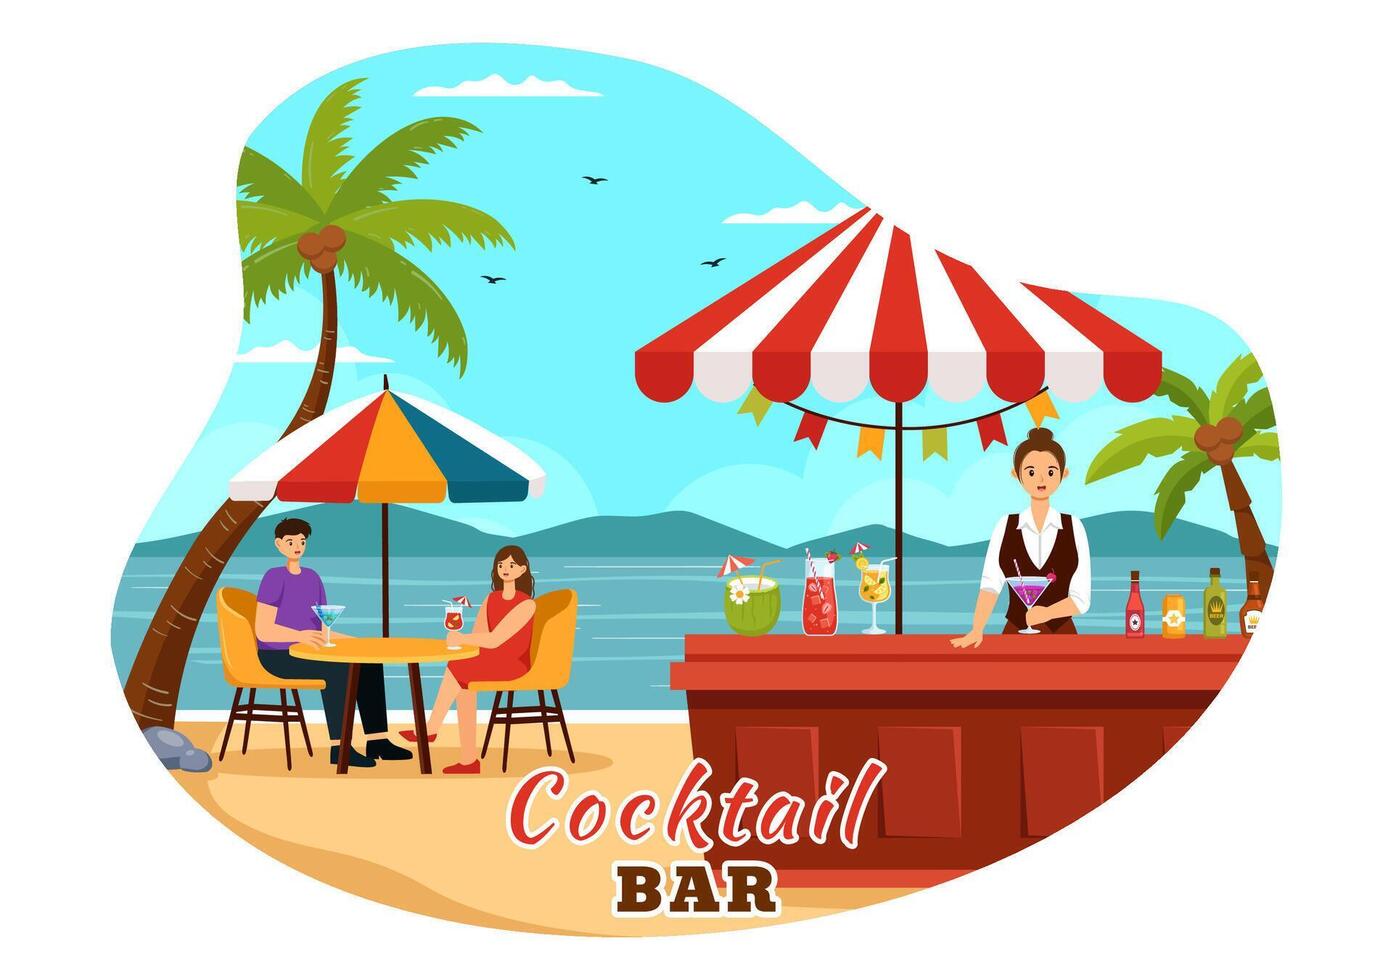 Cocktail Bar or Nightclub Illustration of Friends Hanging Out with Alcoholic Fruit Juice Drinks or Cocktails in Flat Cartoon Background vector